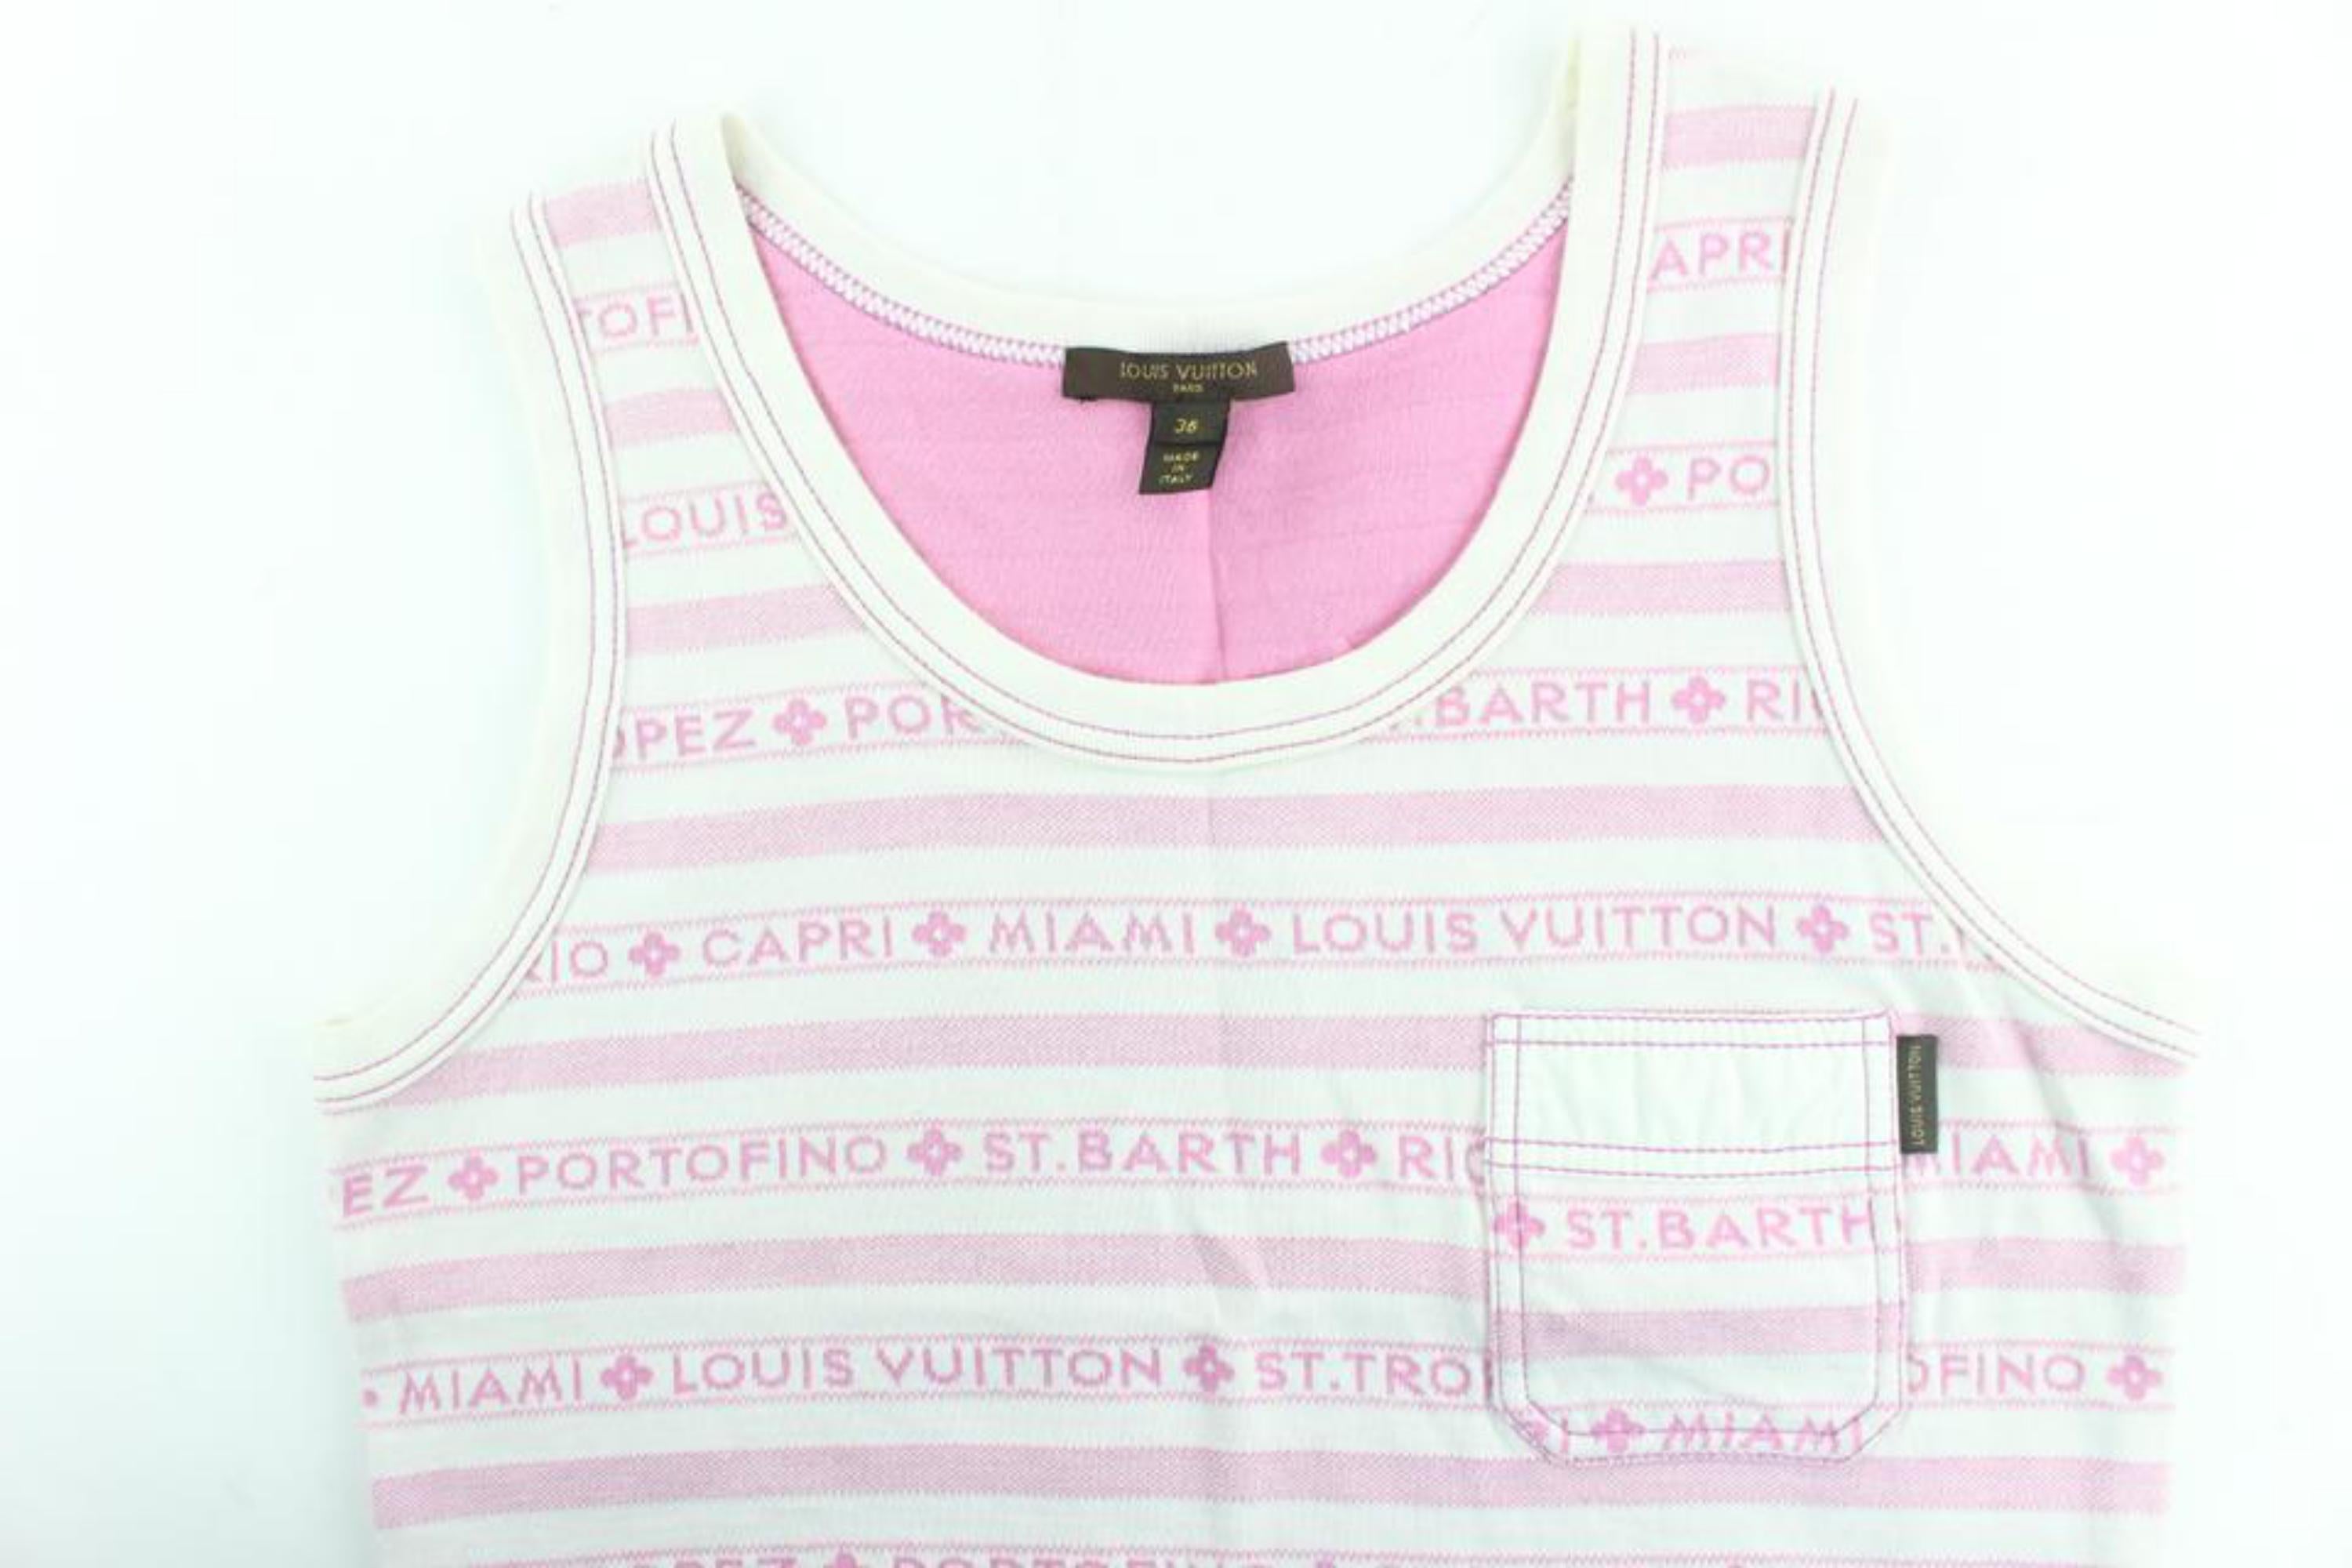 Louis Vuitton Pink Cruise Logo Island Shirt 21lz1106 Tank Top/Cami In Excellent Condition For Sale In Forest Hills, NY